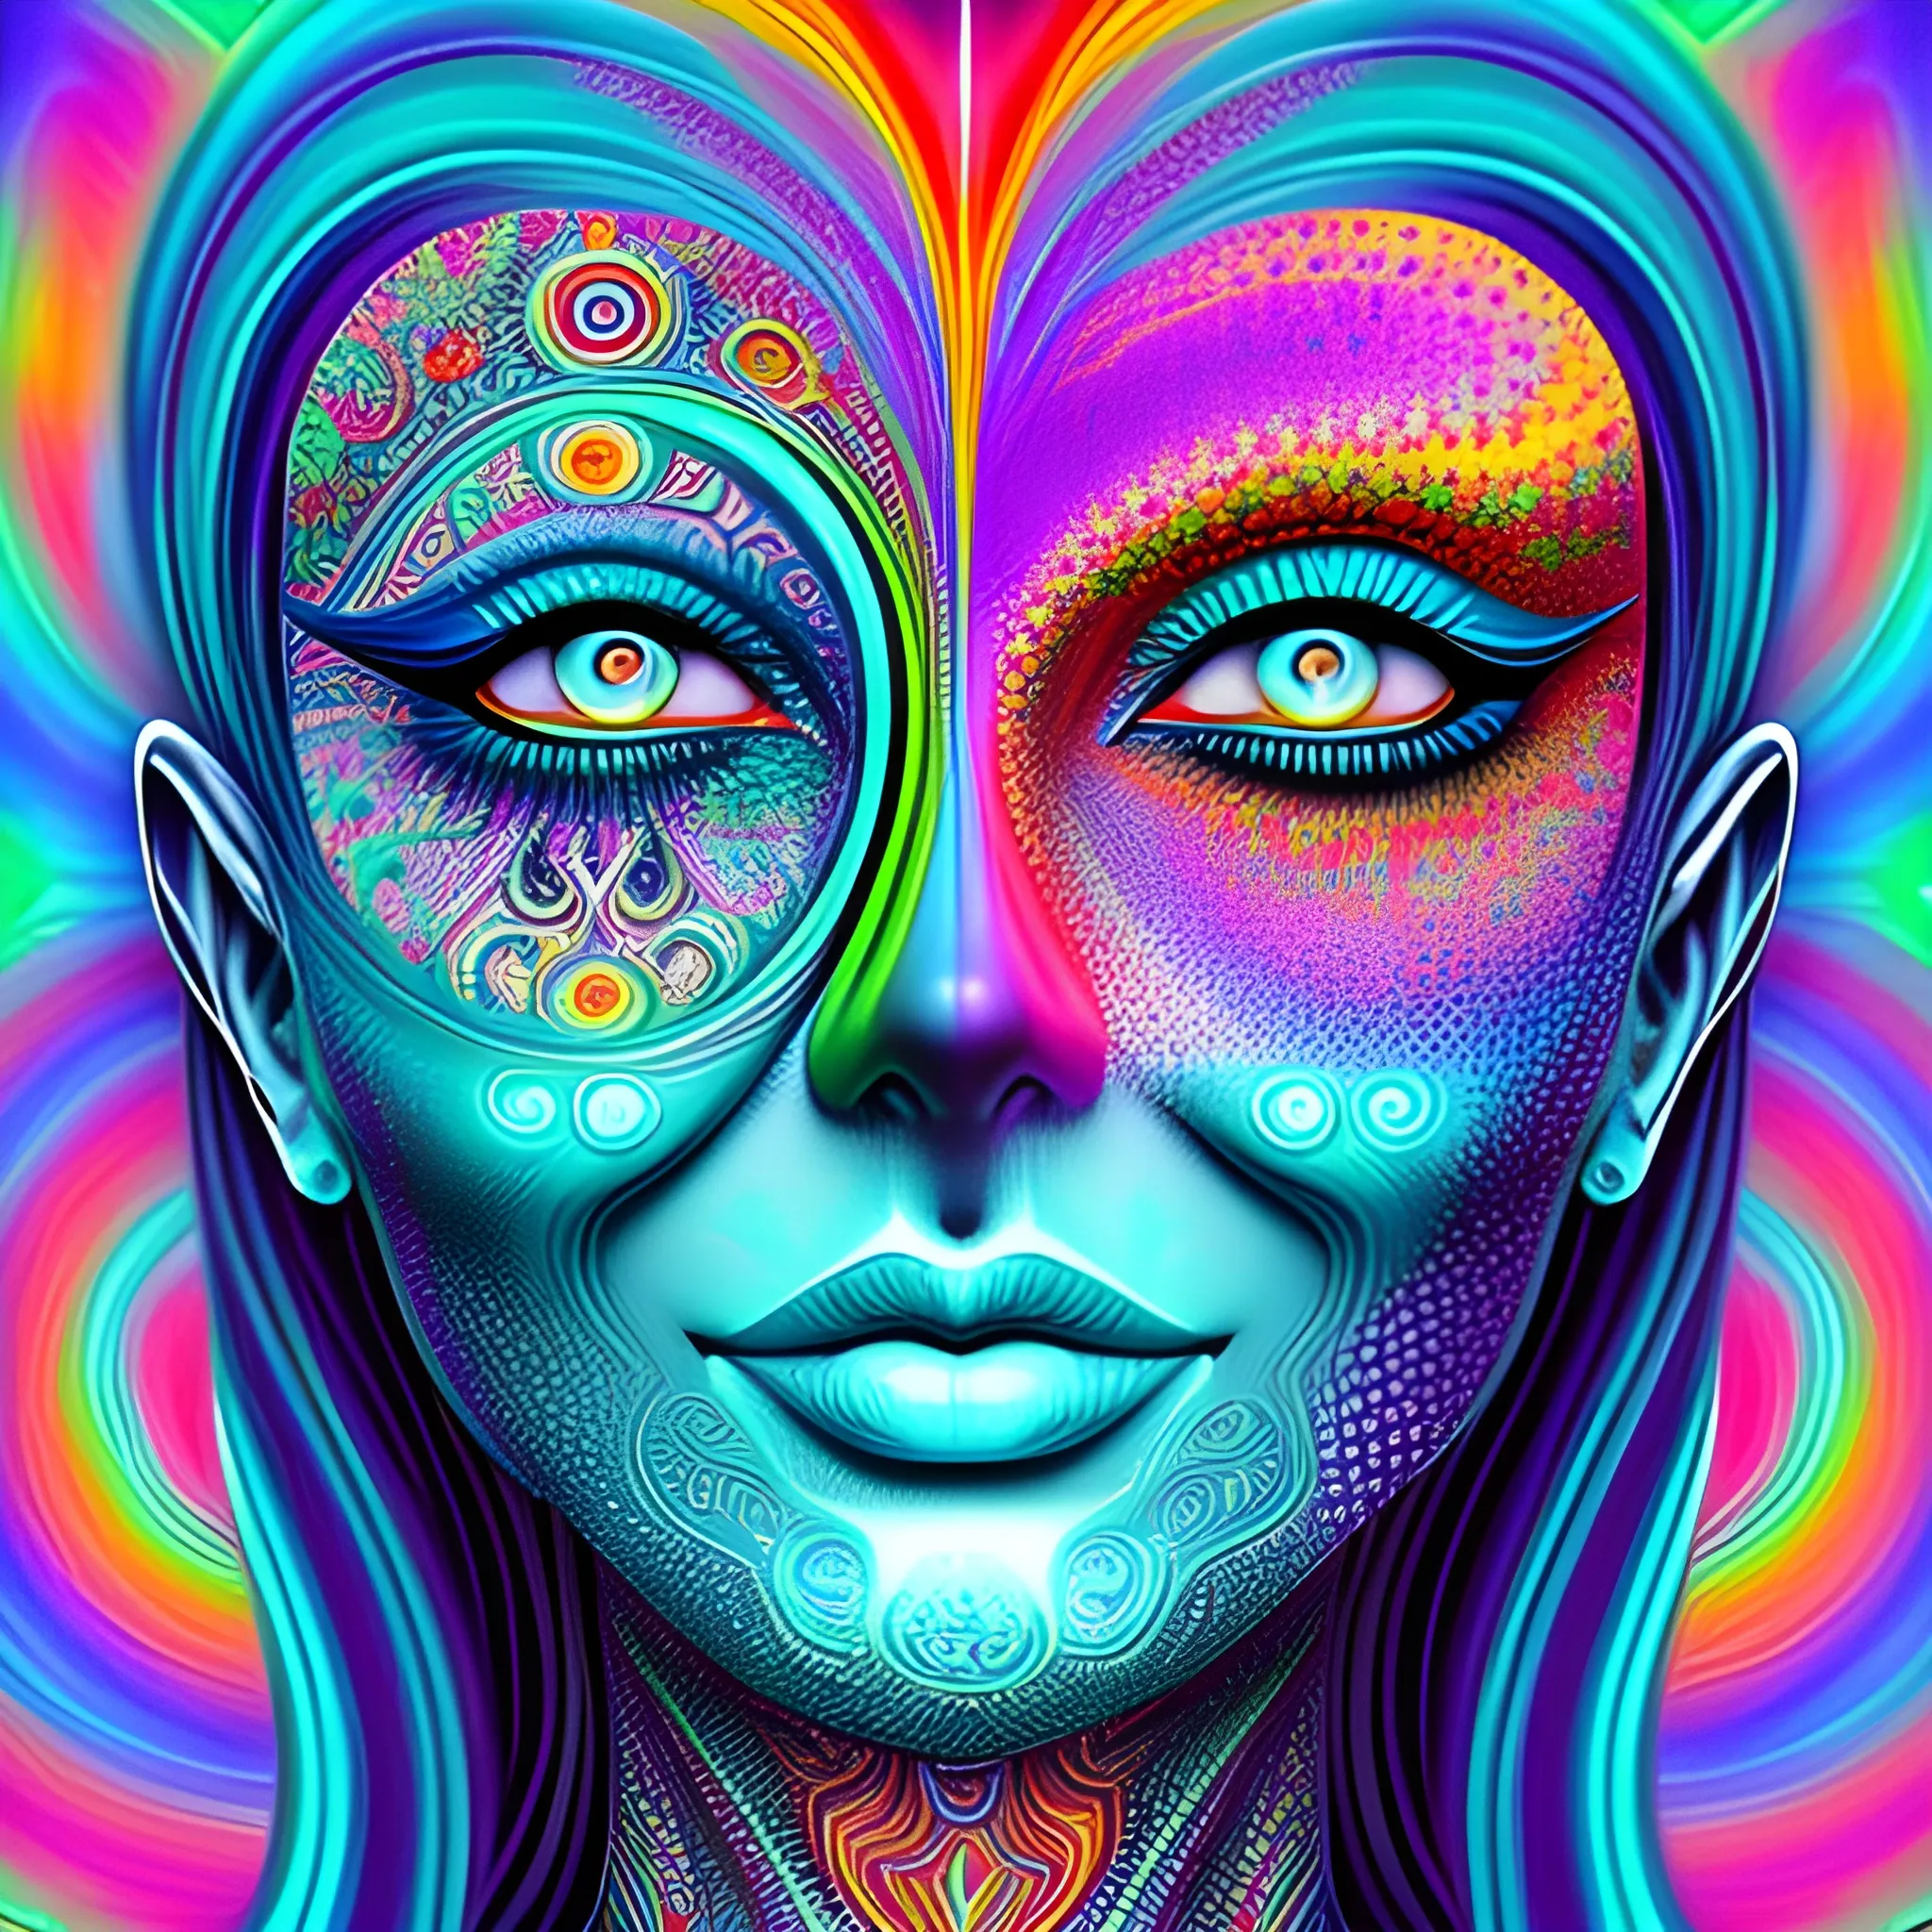 Enigmatic Dream based on colorful fractals. the face of a beautiful girl is visible in the background., Trippy, 3D